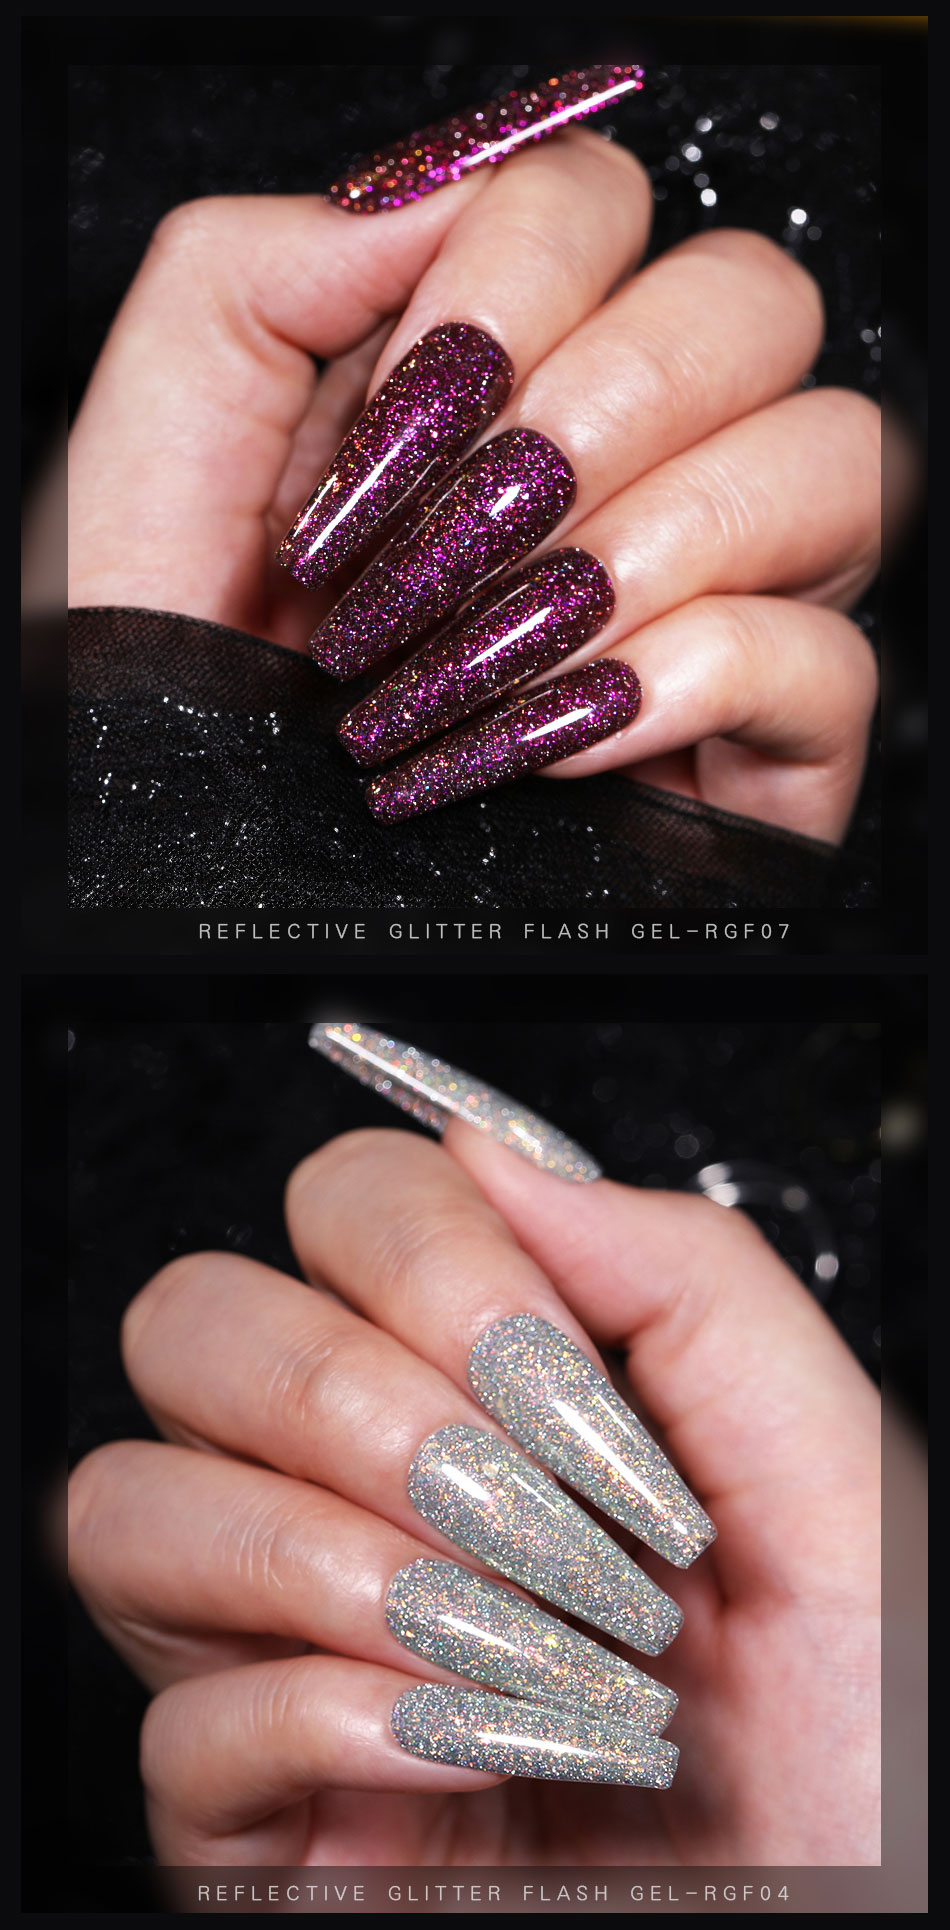 How To DIY Your Nails With Reflective Glitter Gel Polish? I BORN PRETTY 